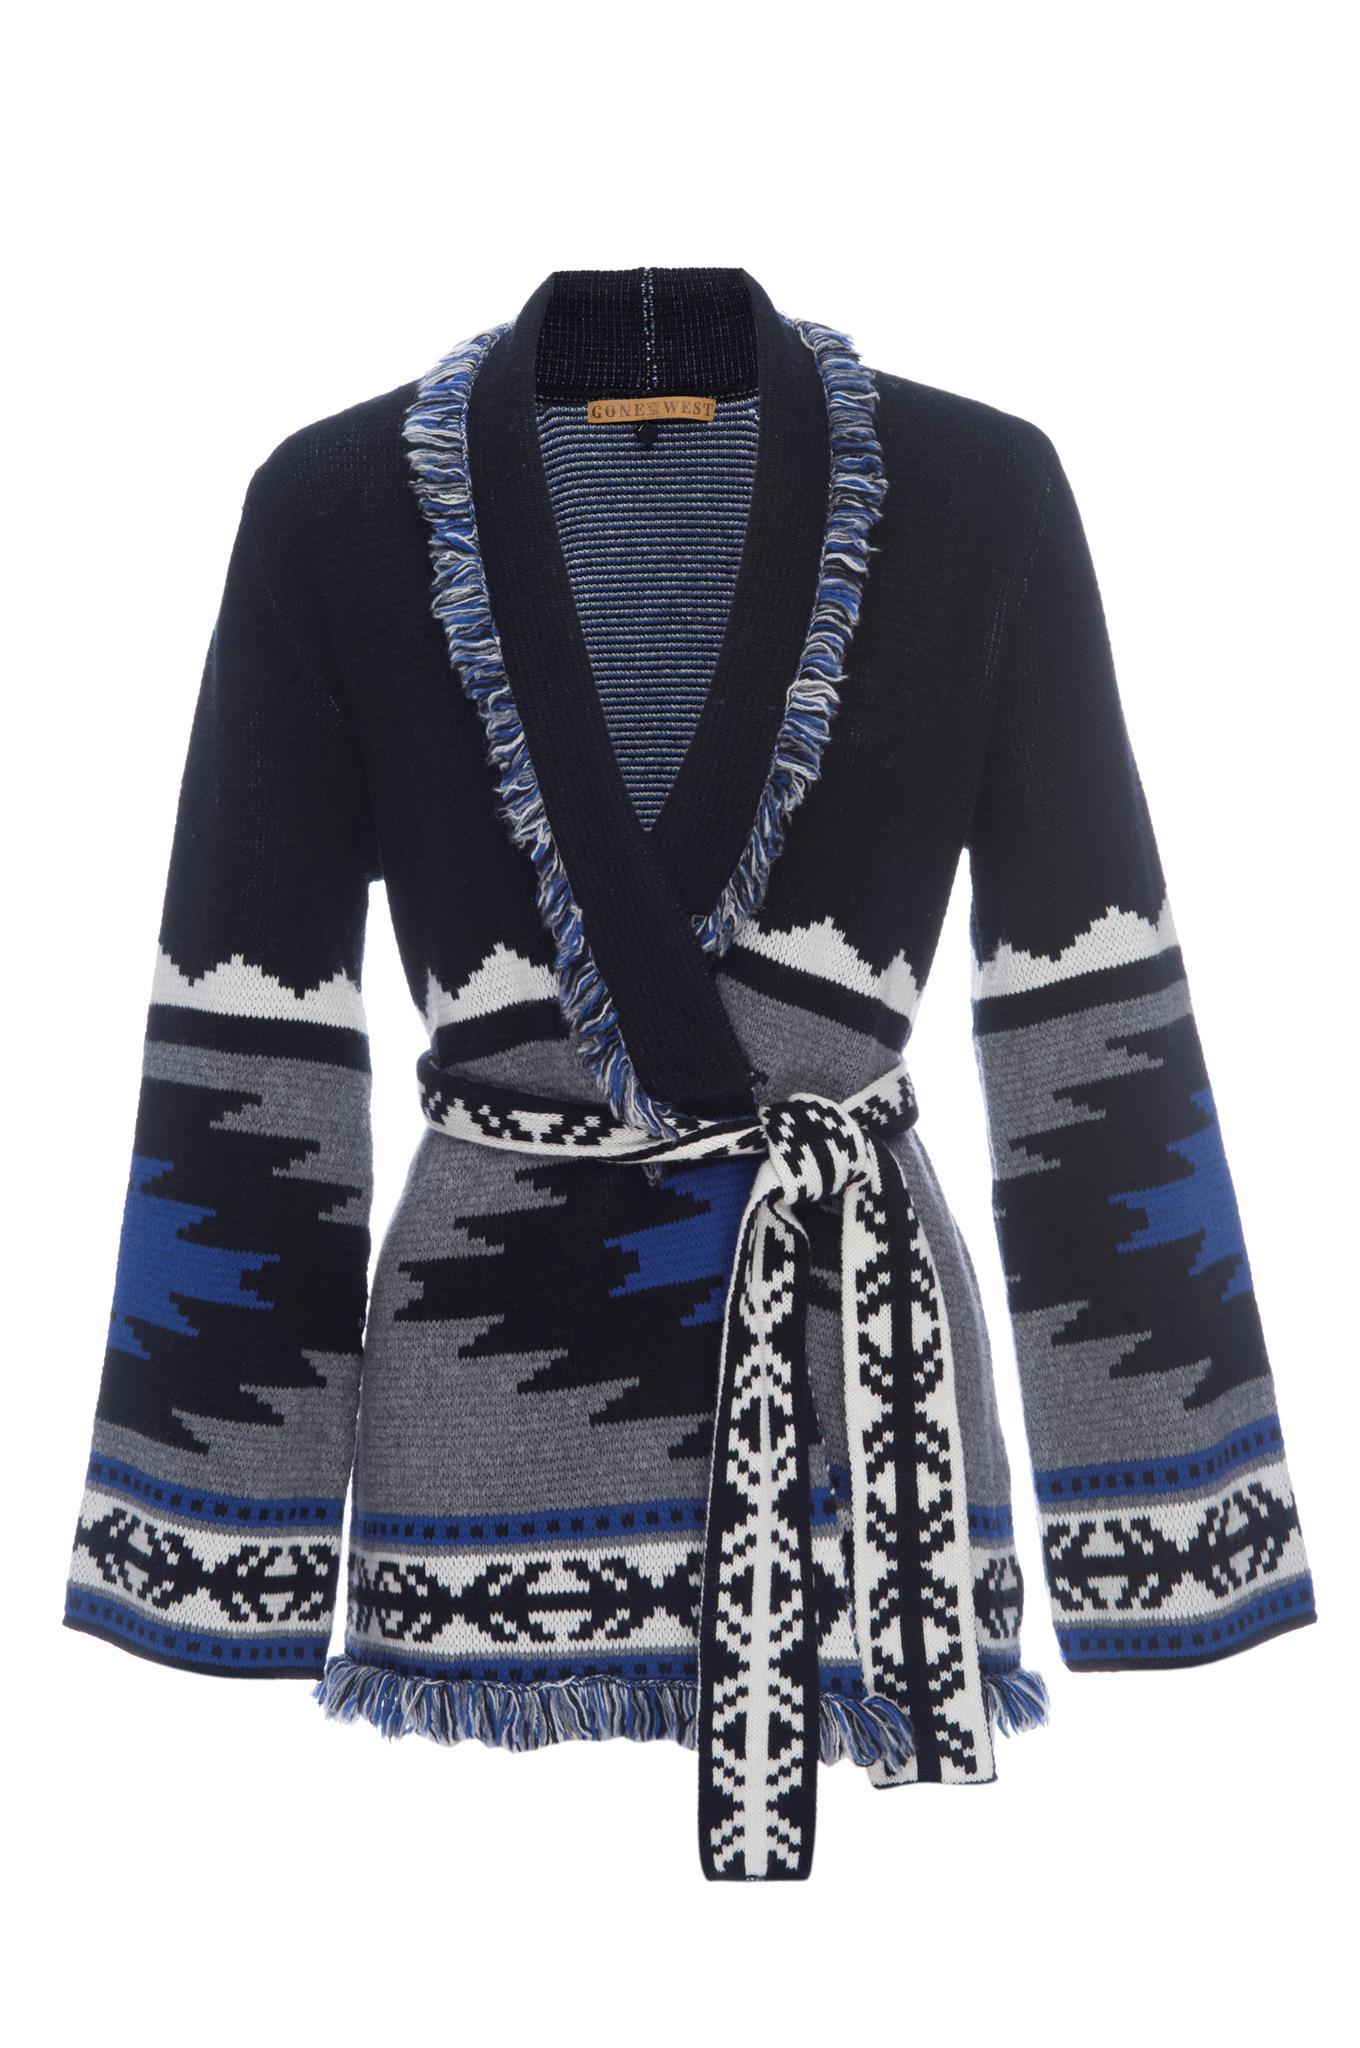 Aztec Wrap Cardigan Sweater – Gone With The West